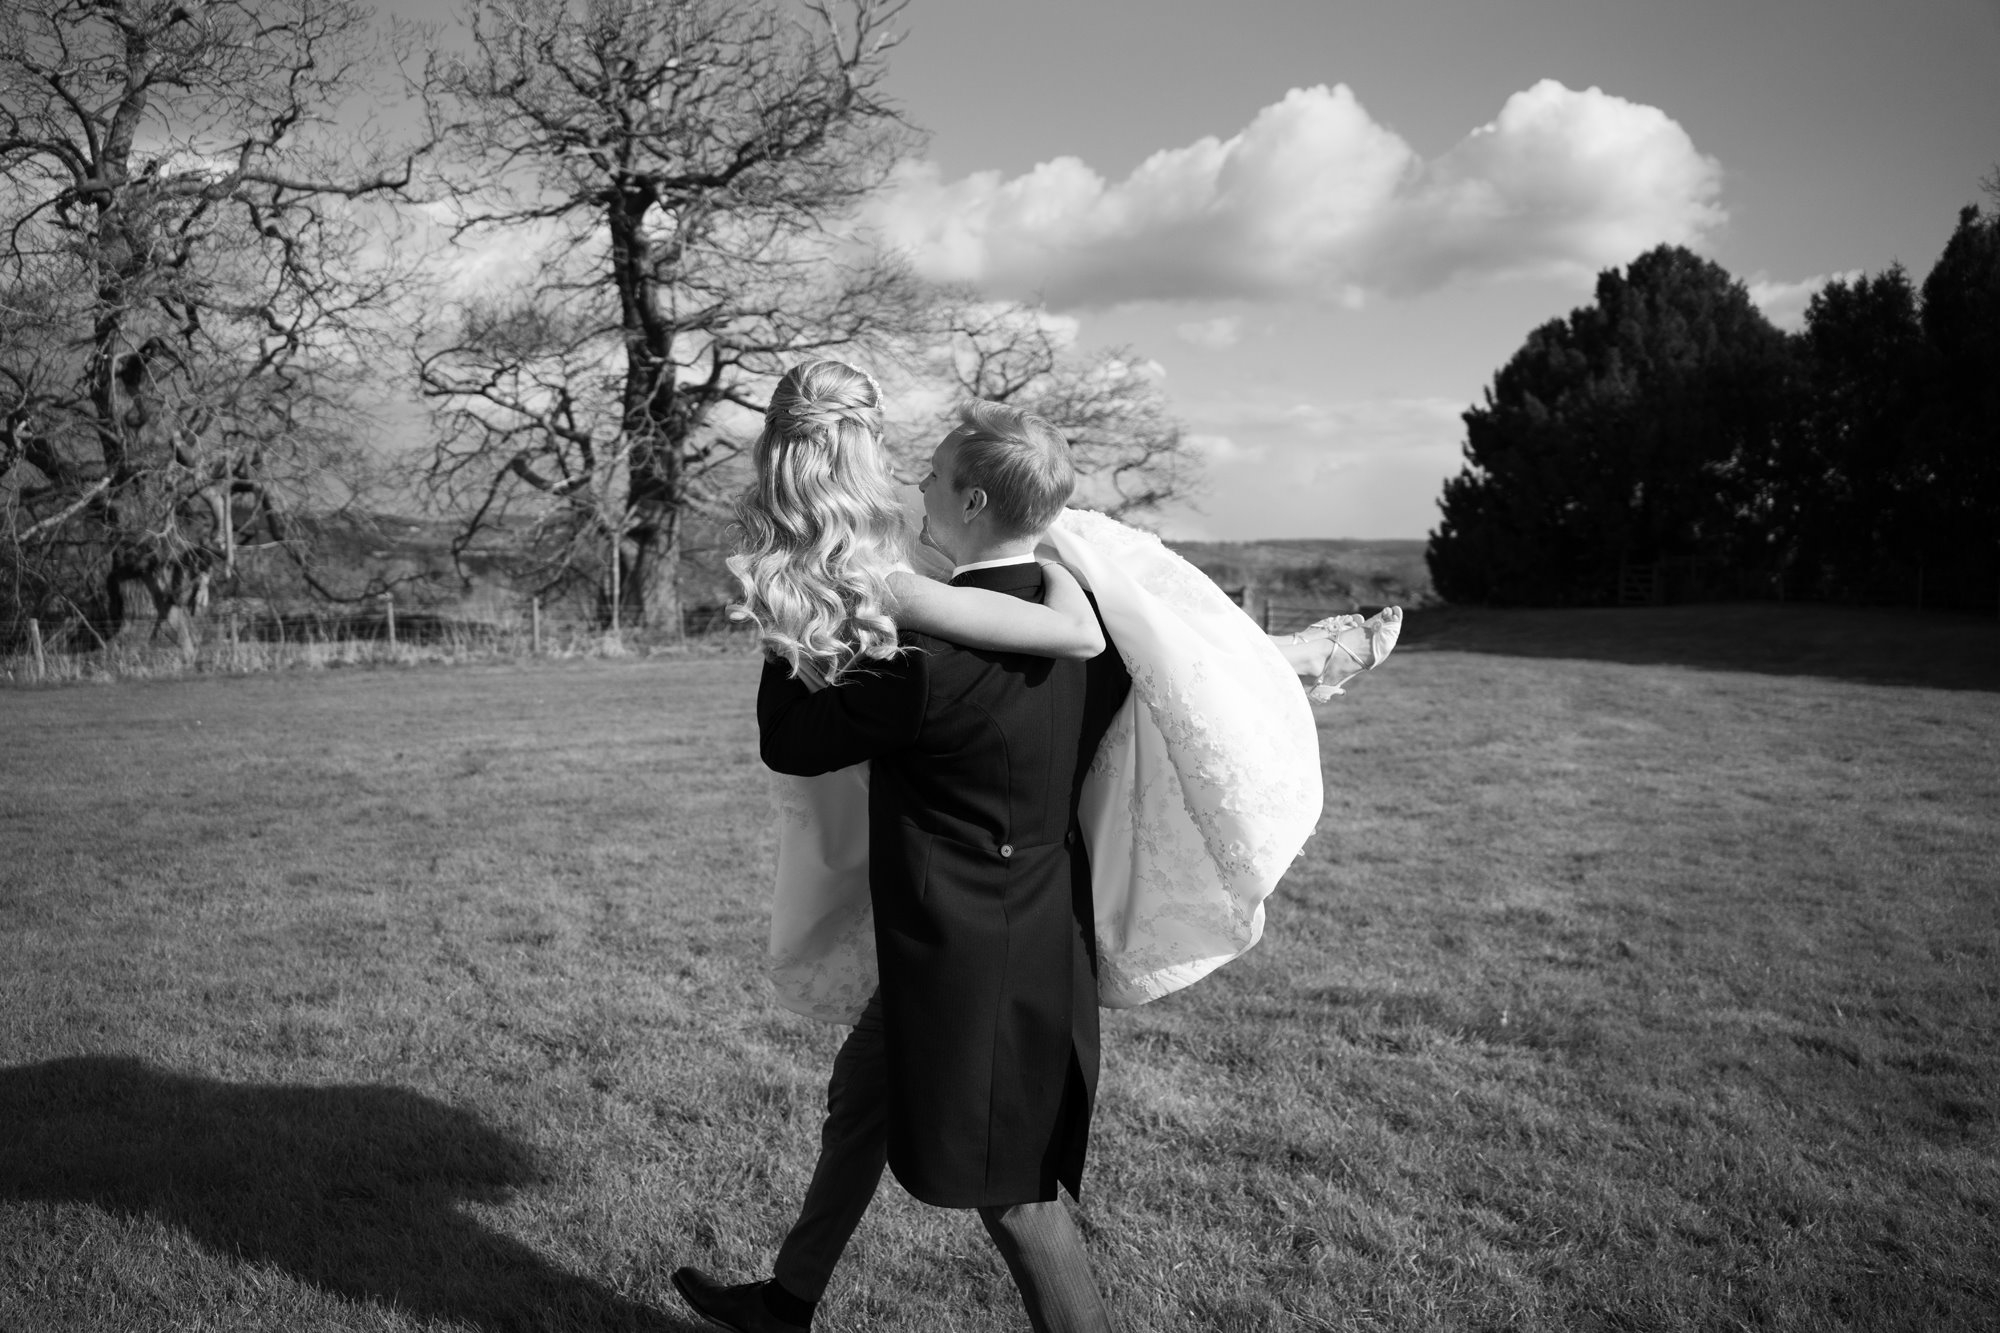 groom carrying his bride across a beautiful countryside lawn with trees in the background